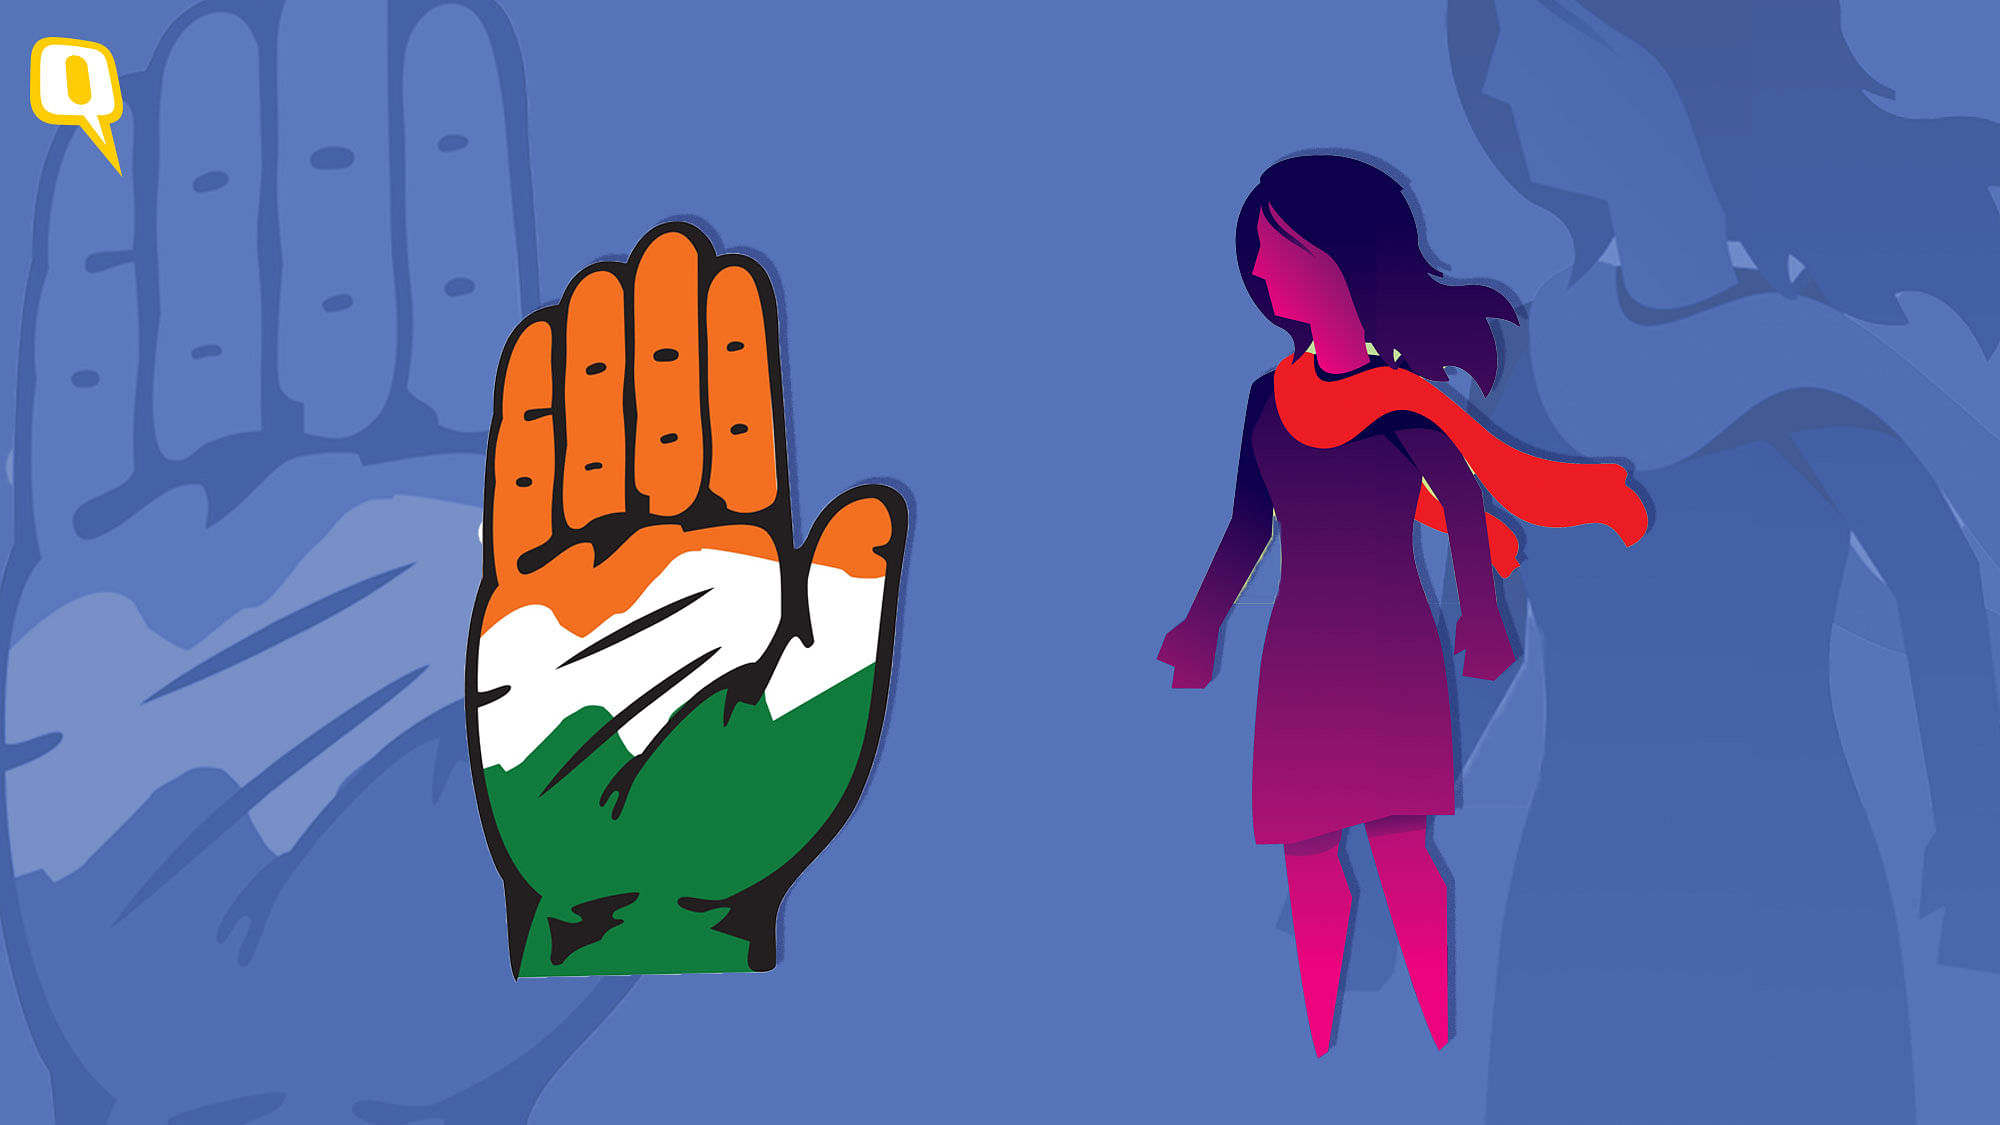 At the moment, women are hardly visible in the Congress’ top echelons. 